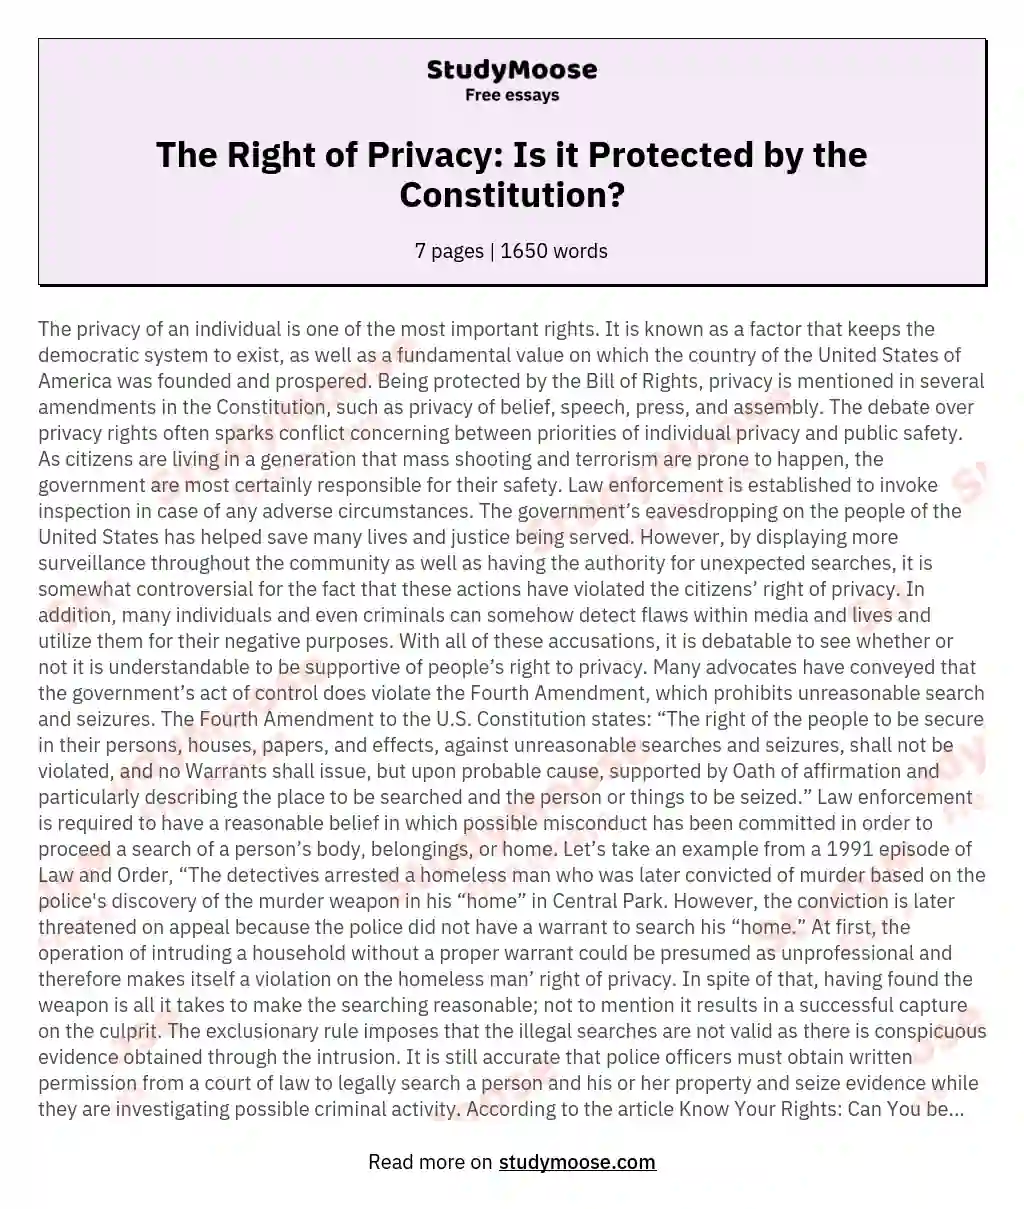 The Right of Privacy: Is it Protected by the Constitution? essay